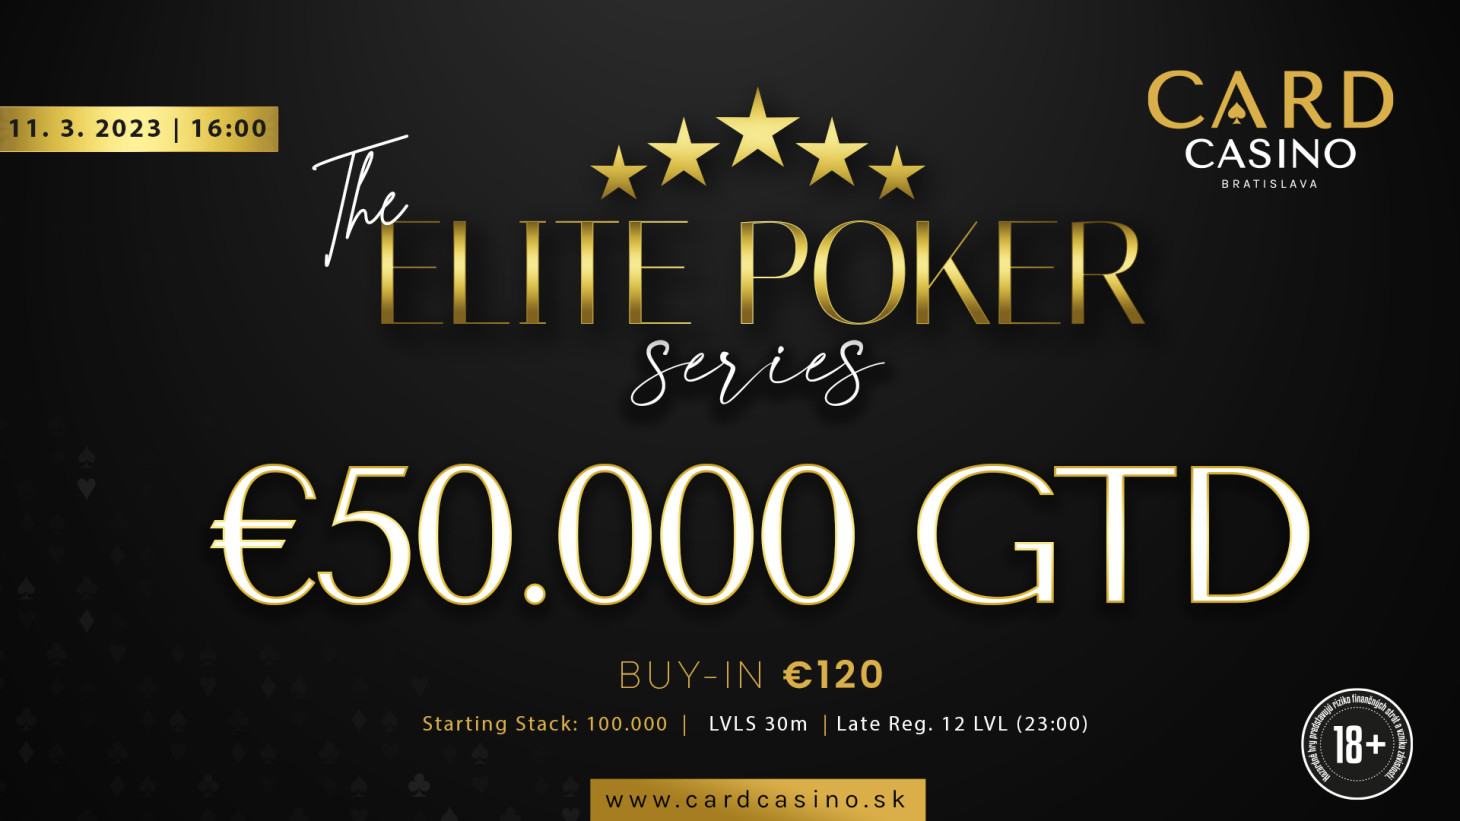 Overnight stays in Carde. Seven days, seven tournaments with almost €100,000 GTD!